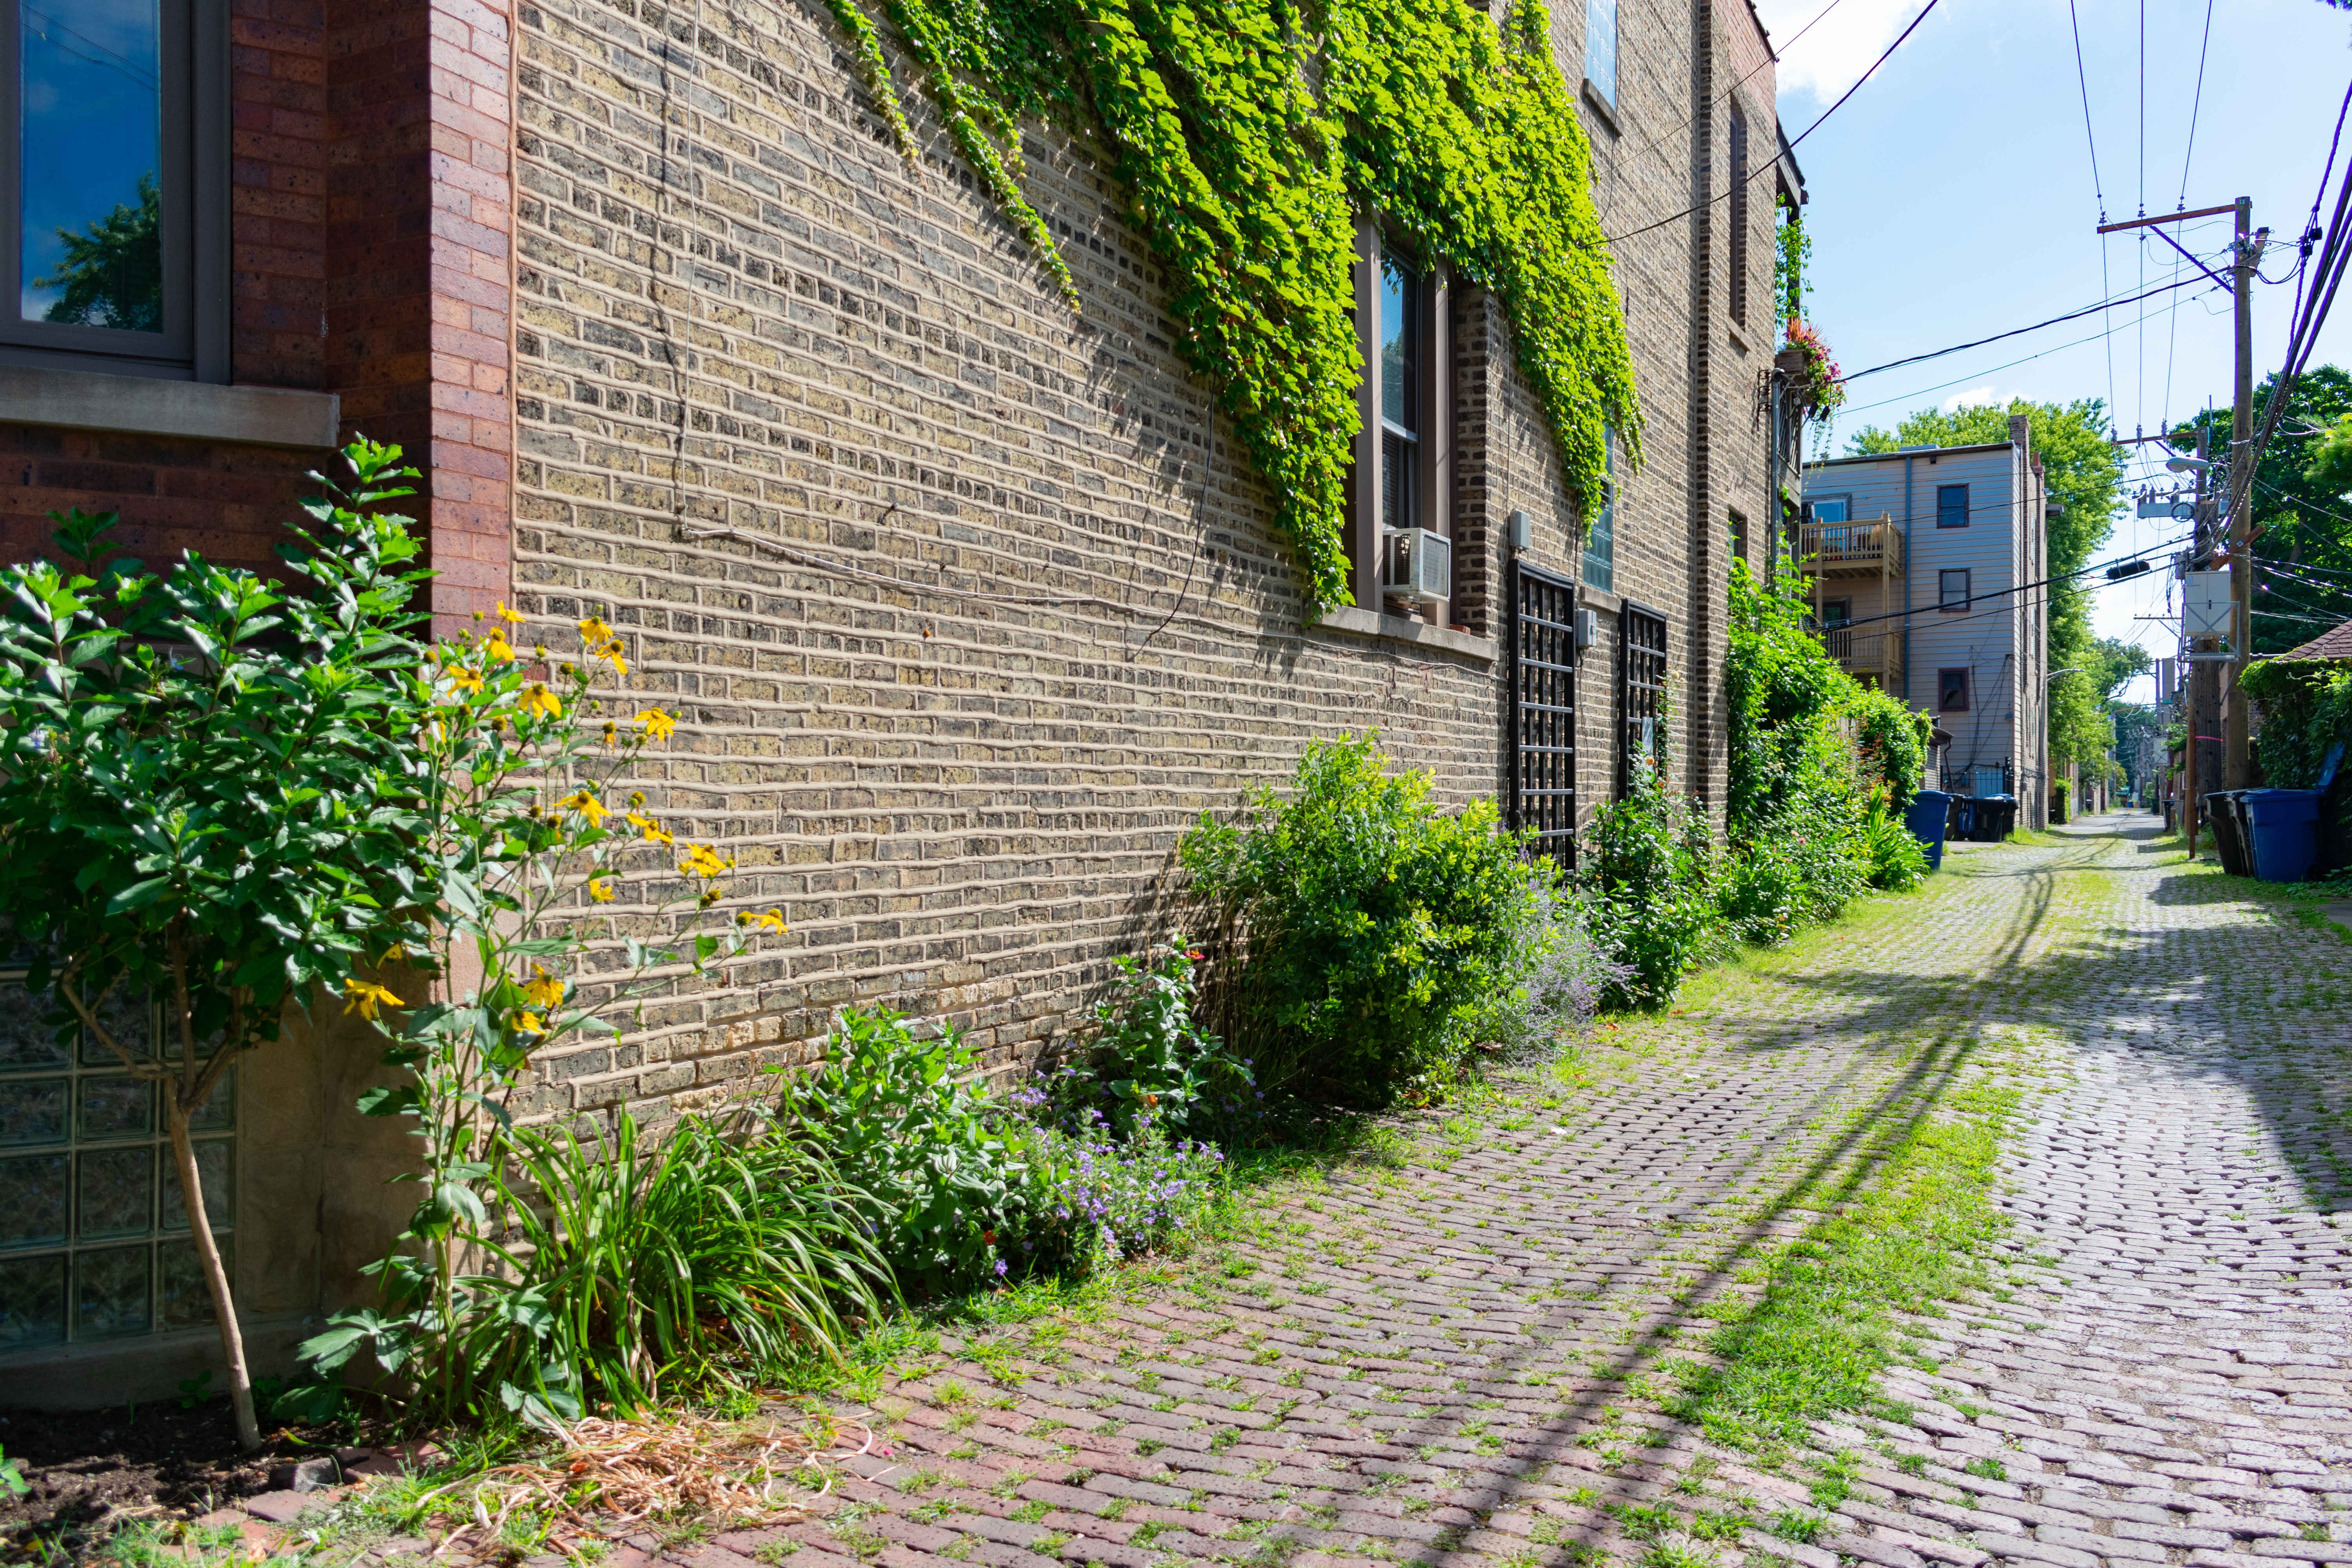 A brick building facing an alley with vines and overgrown bushes.